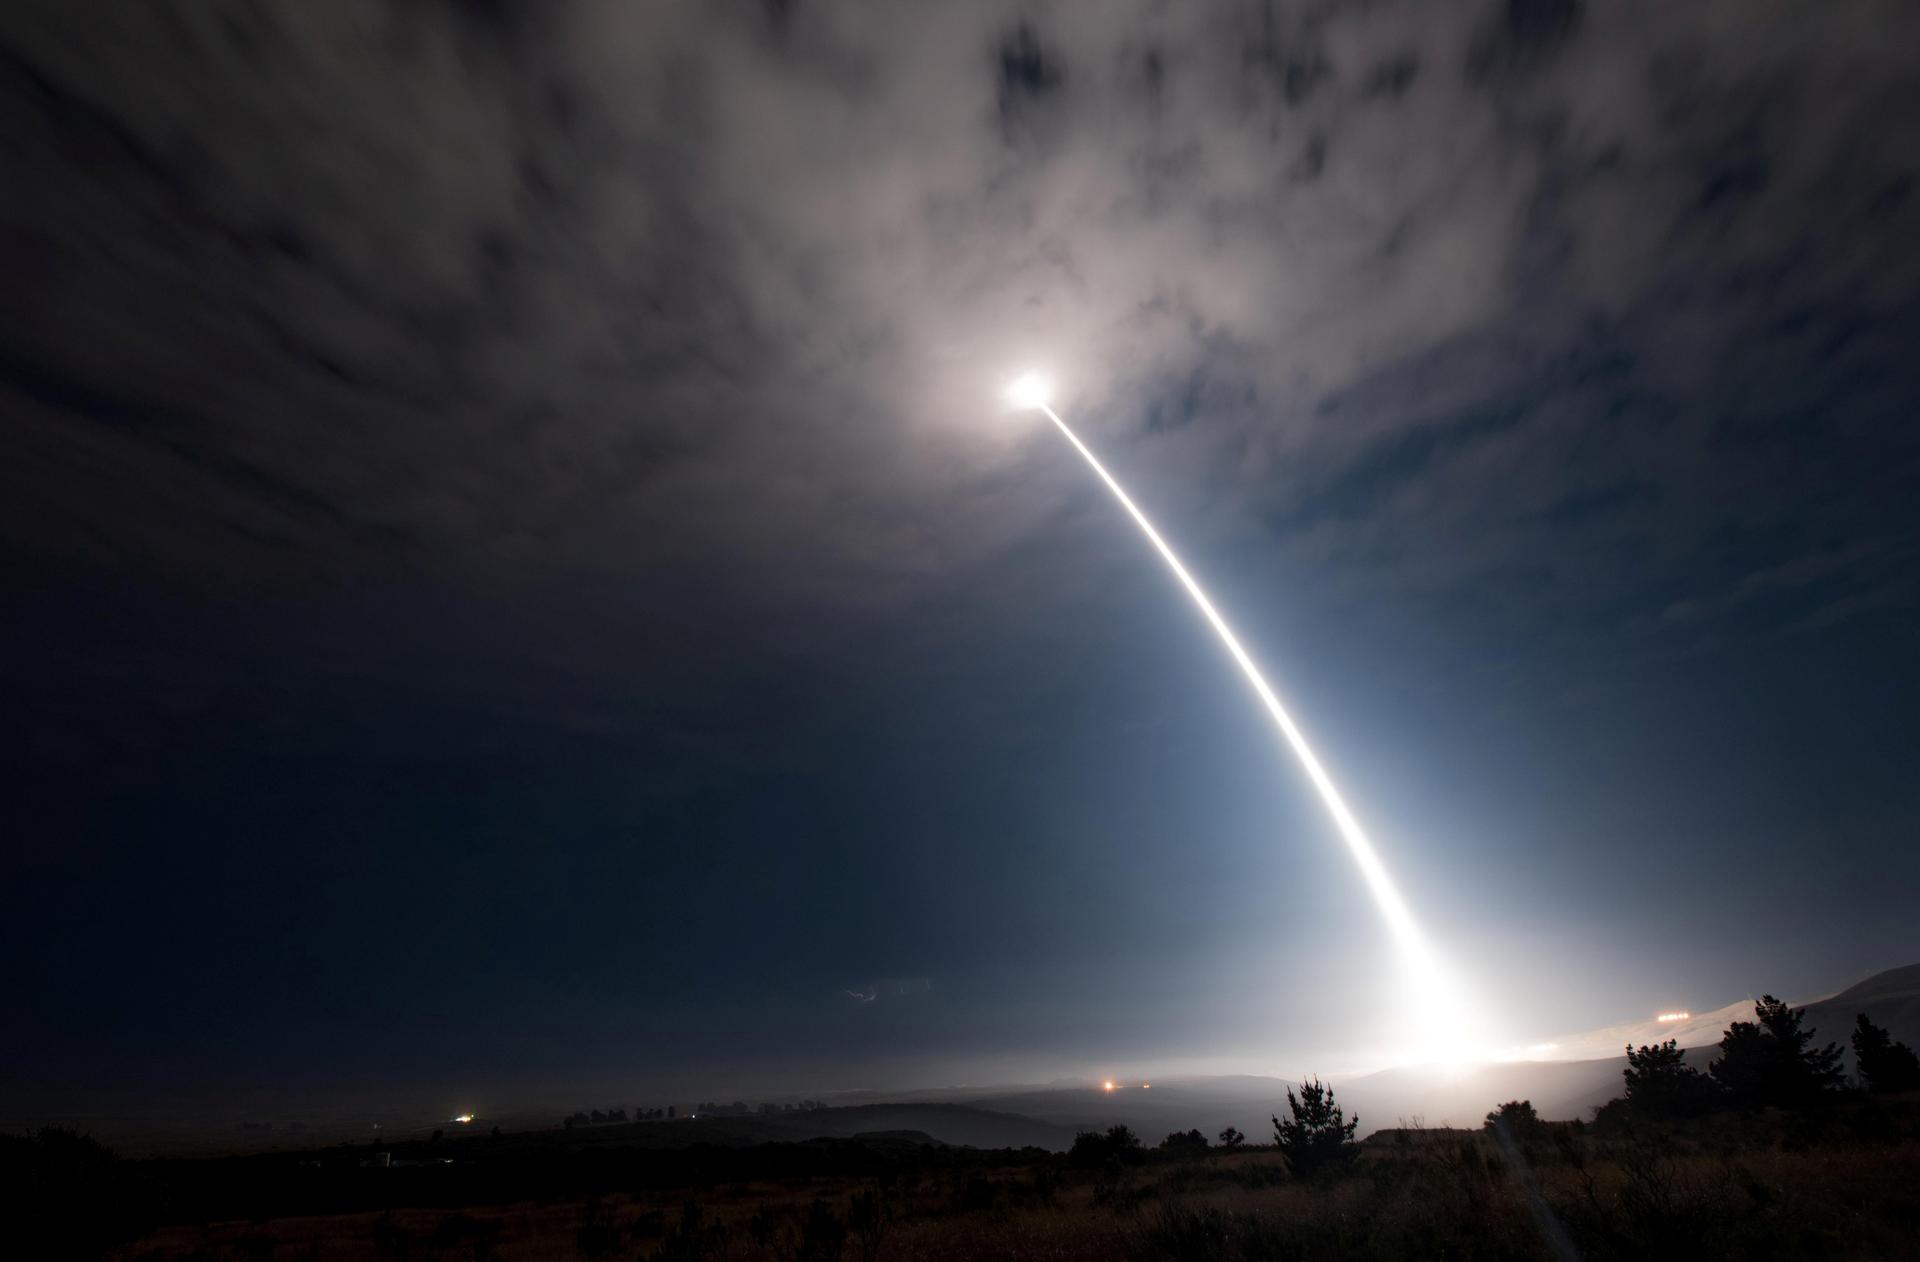 A test launch of a Minuteman III intercontinental ballistic missile at Vandenberg Air Force Base, California, August 2nd 2017  